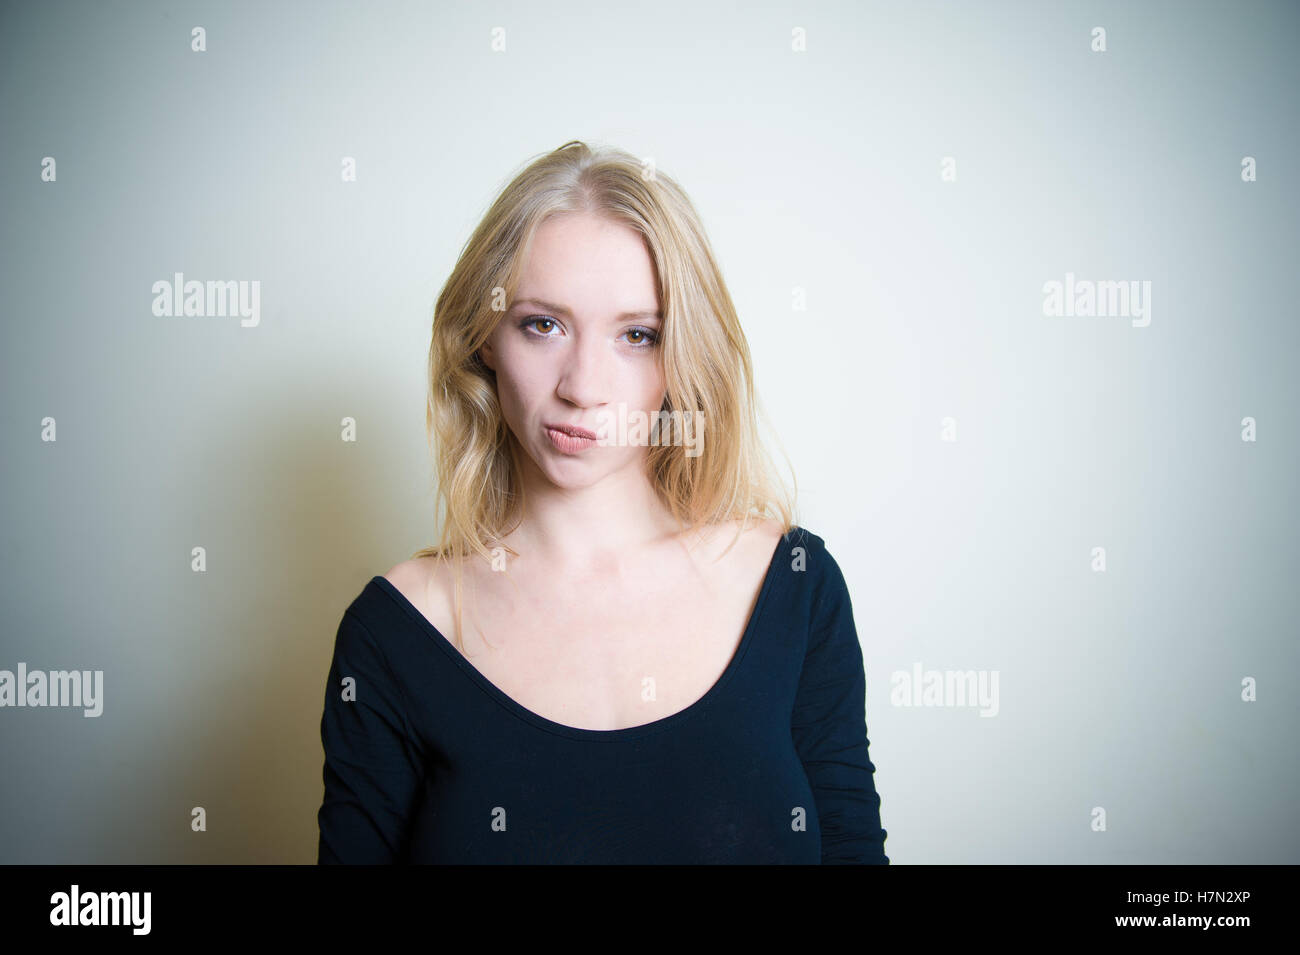 Young blond woman, smirking with little grimace and looking at camera copy space Stock Photo